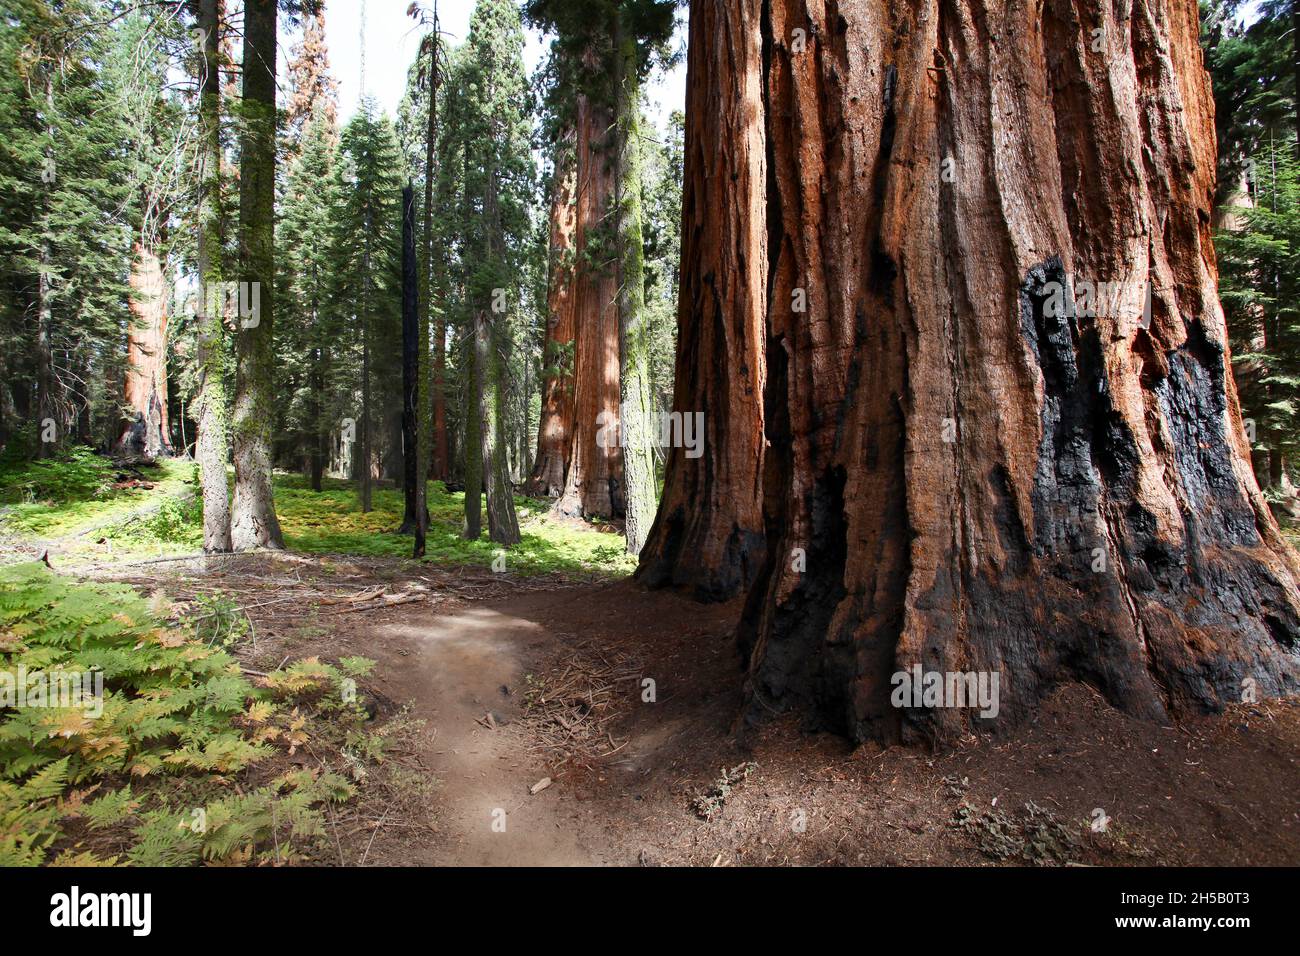 Giant Sequoia (Redwood) trees at Sequoia and Kings National Park, California, USA Stock Photo